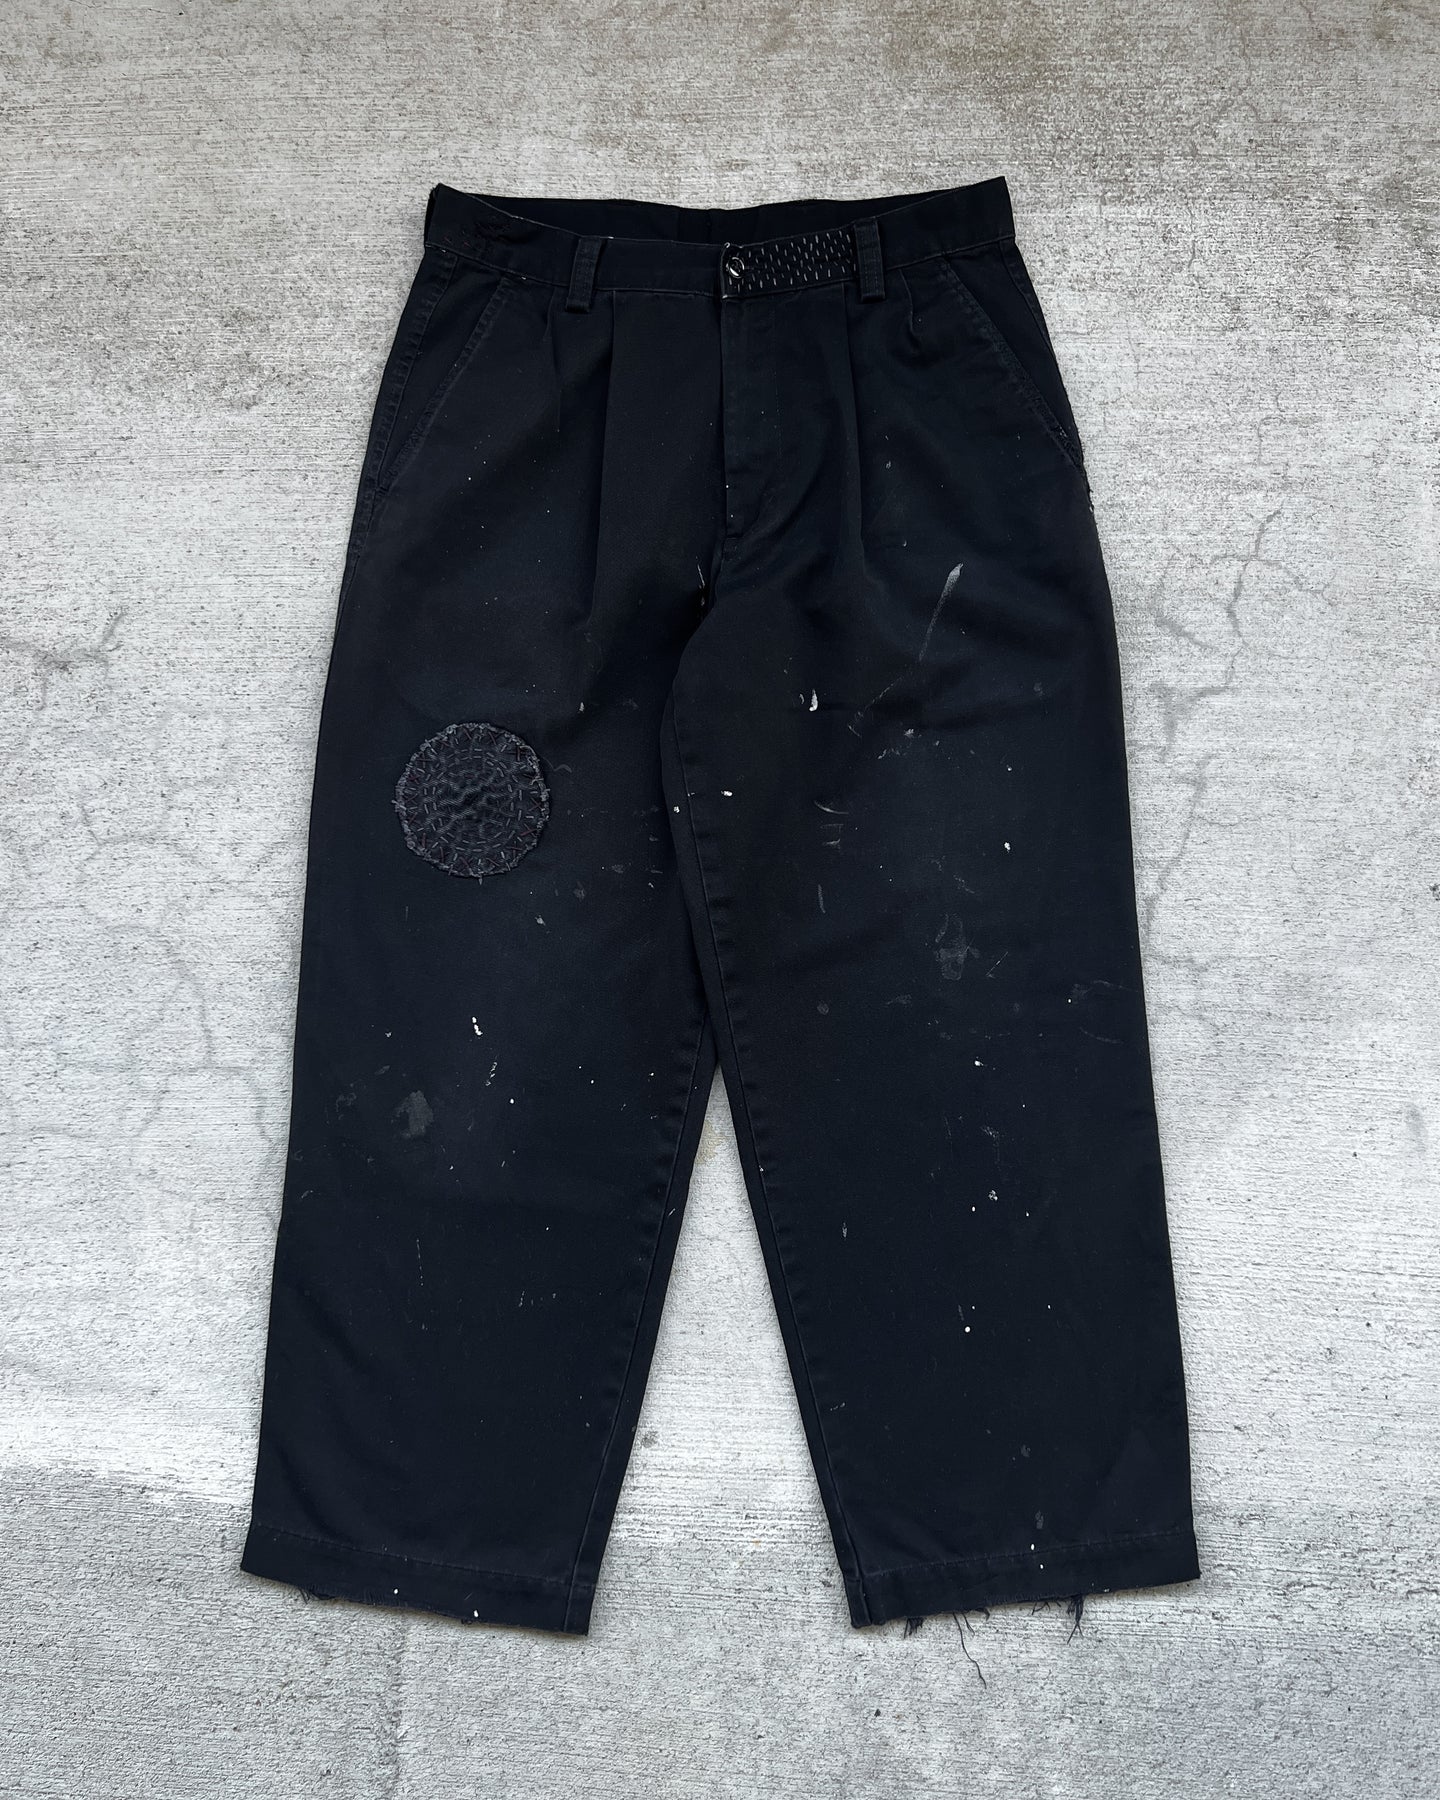 1980s Heavily Repaired Black Chino Work Pants - Size 30 x 26